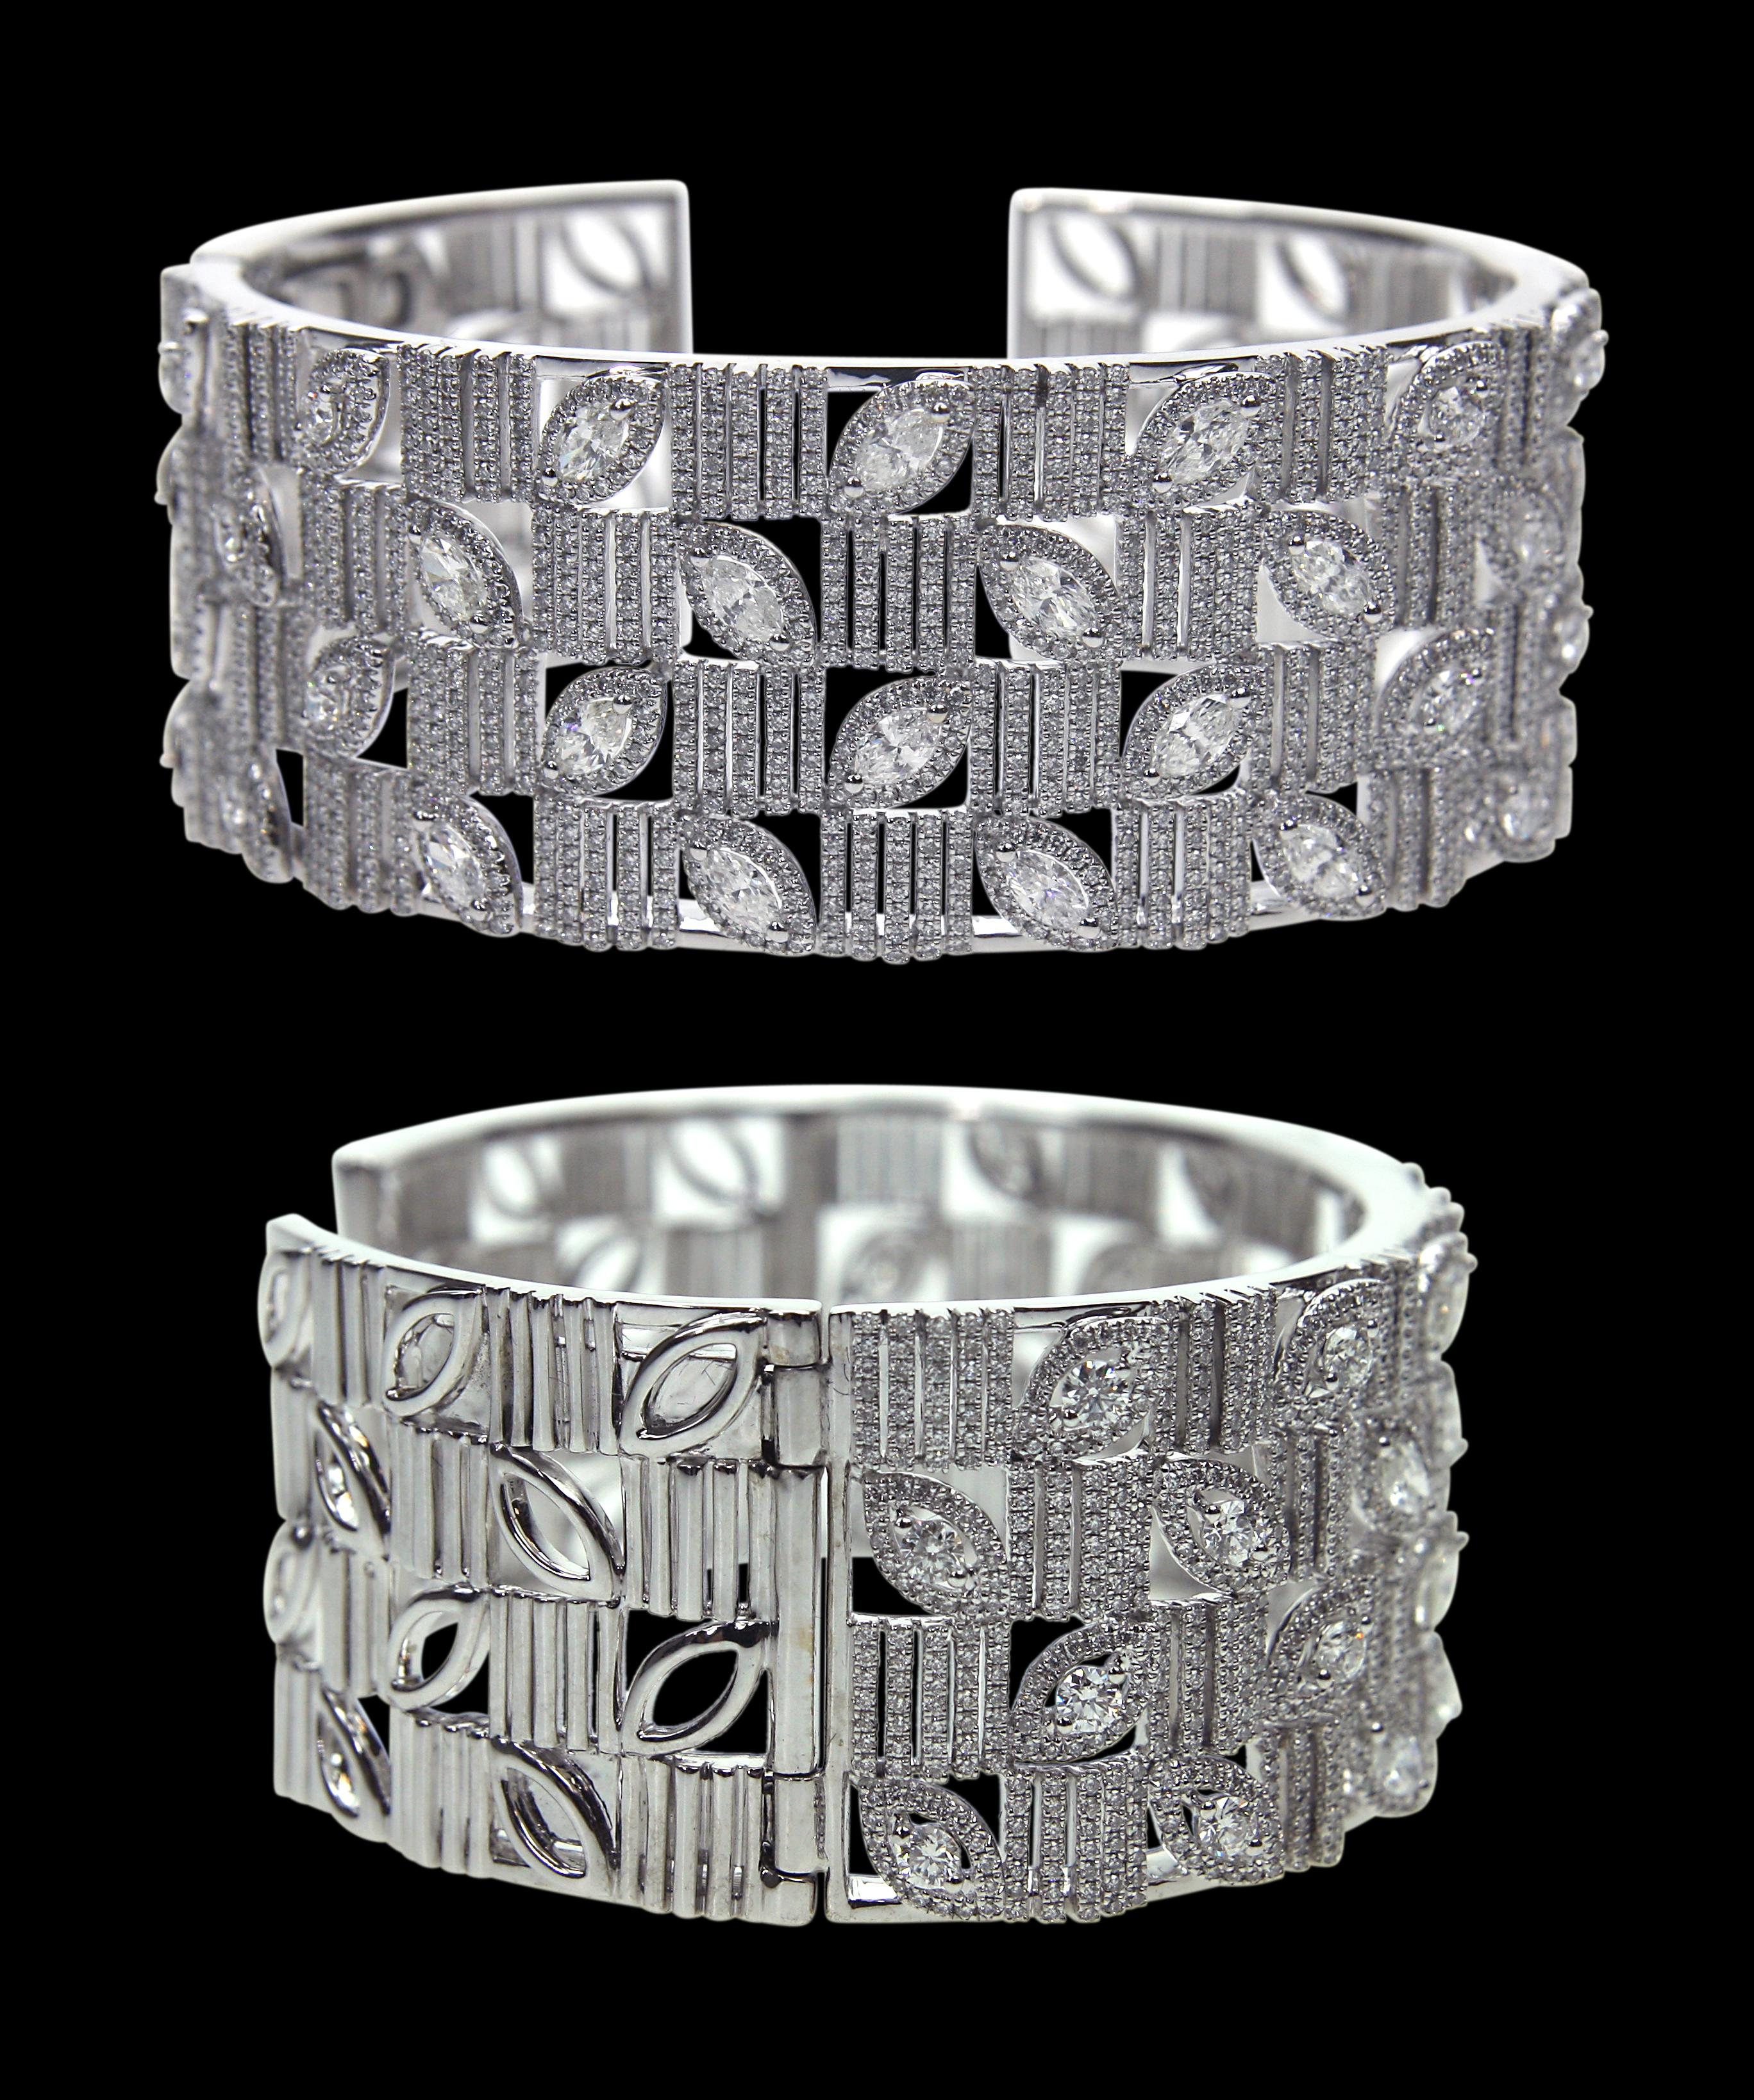 Tailor Made 18 Karat White Gold And Diamond Bracelet 

Bangles:
Diamonds of approximately 7.323 carats, mounted on 18 karat white gold bracelet. The Bangle weighs approximately around 70.195 grams.

Please note: The charges specified do not include